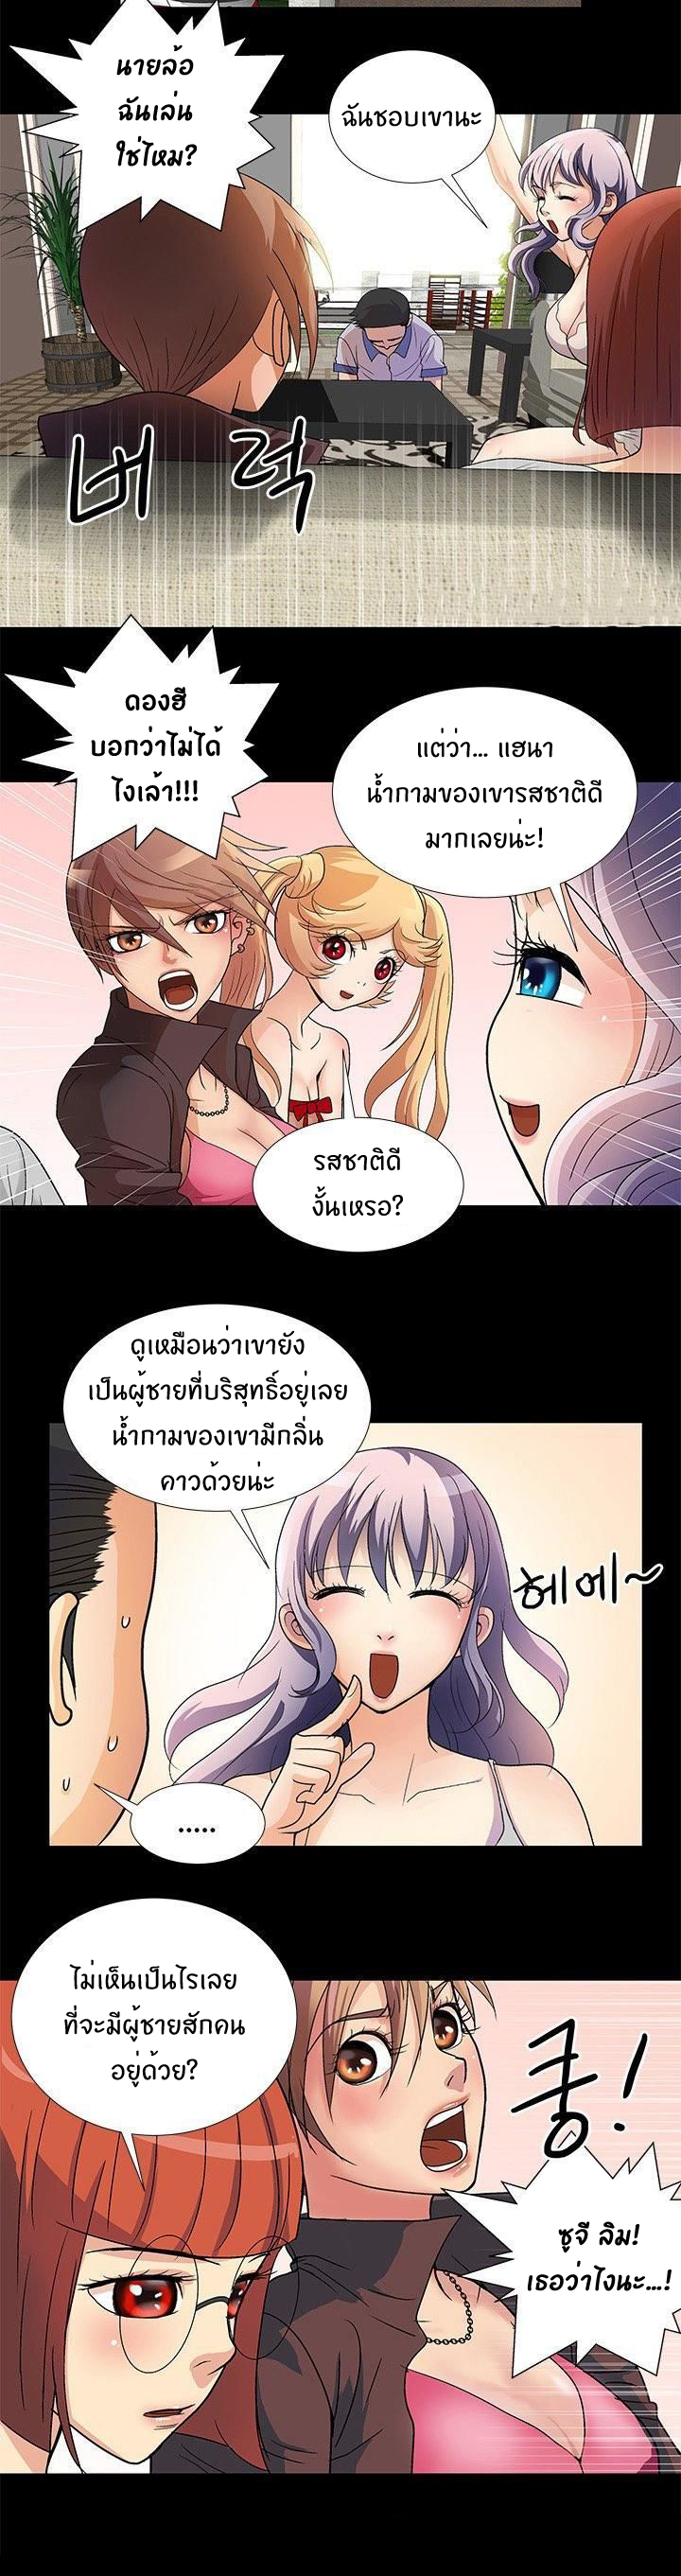 Will You Do as I Say? - หน้า 6